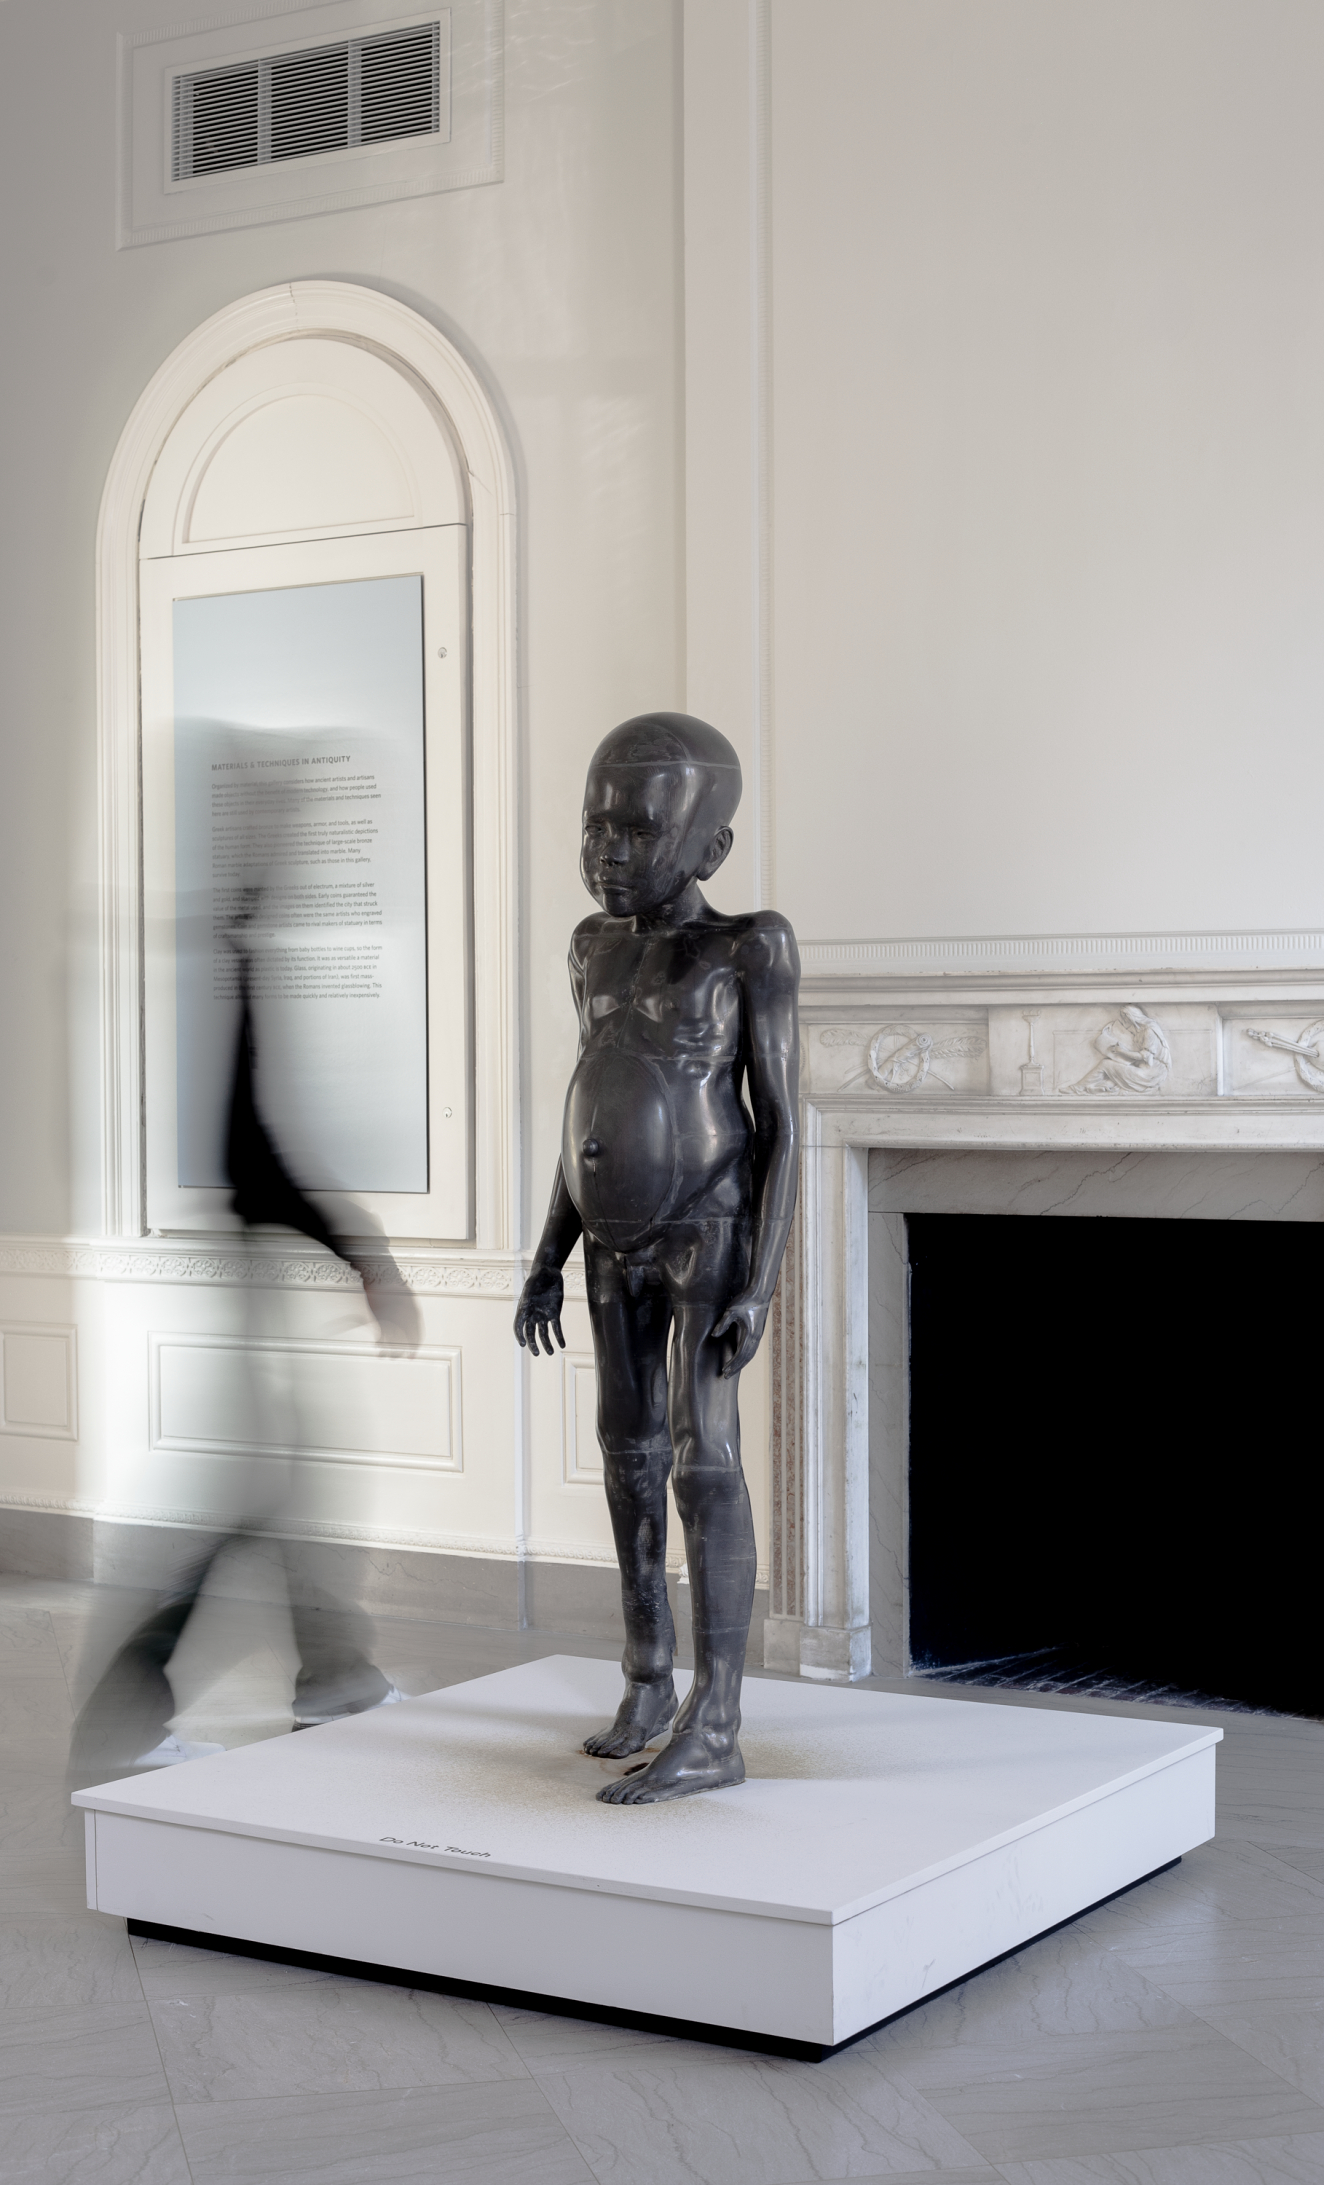 A vertical photograph of a sculpture of a naked, dark-skinned, child with a distended belly, swollen arms, and a bald head on a white, square platform in a museum gallery. There is the blurred person in motion walking on the left side of the platform. 